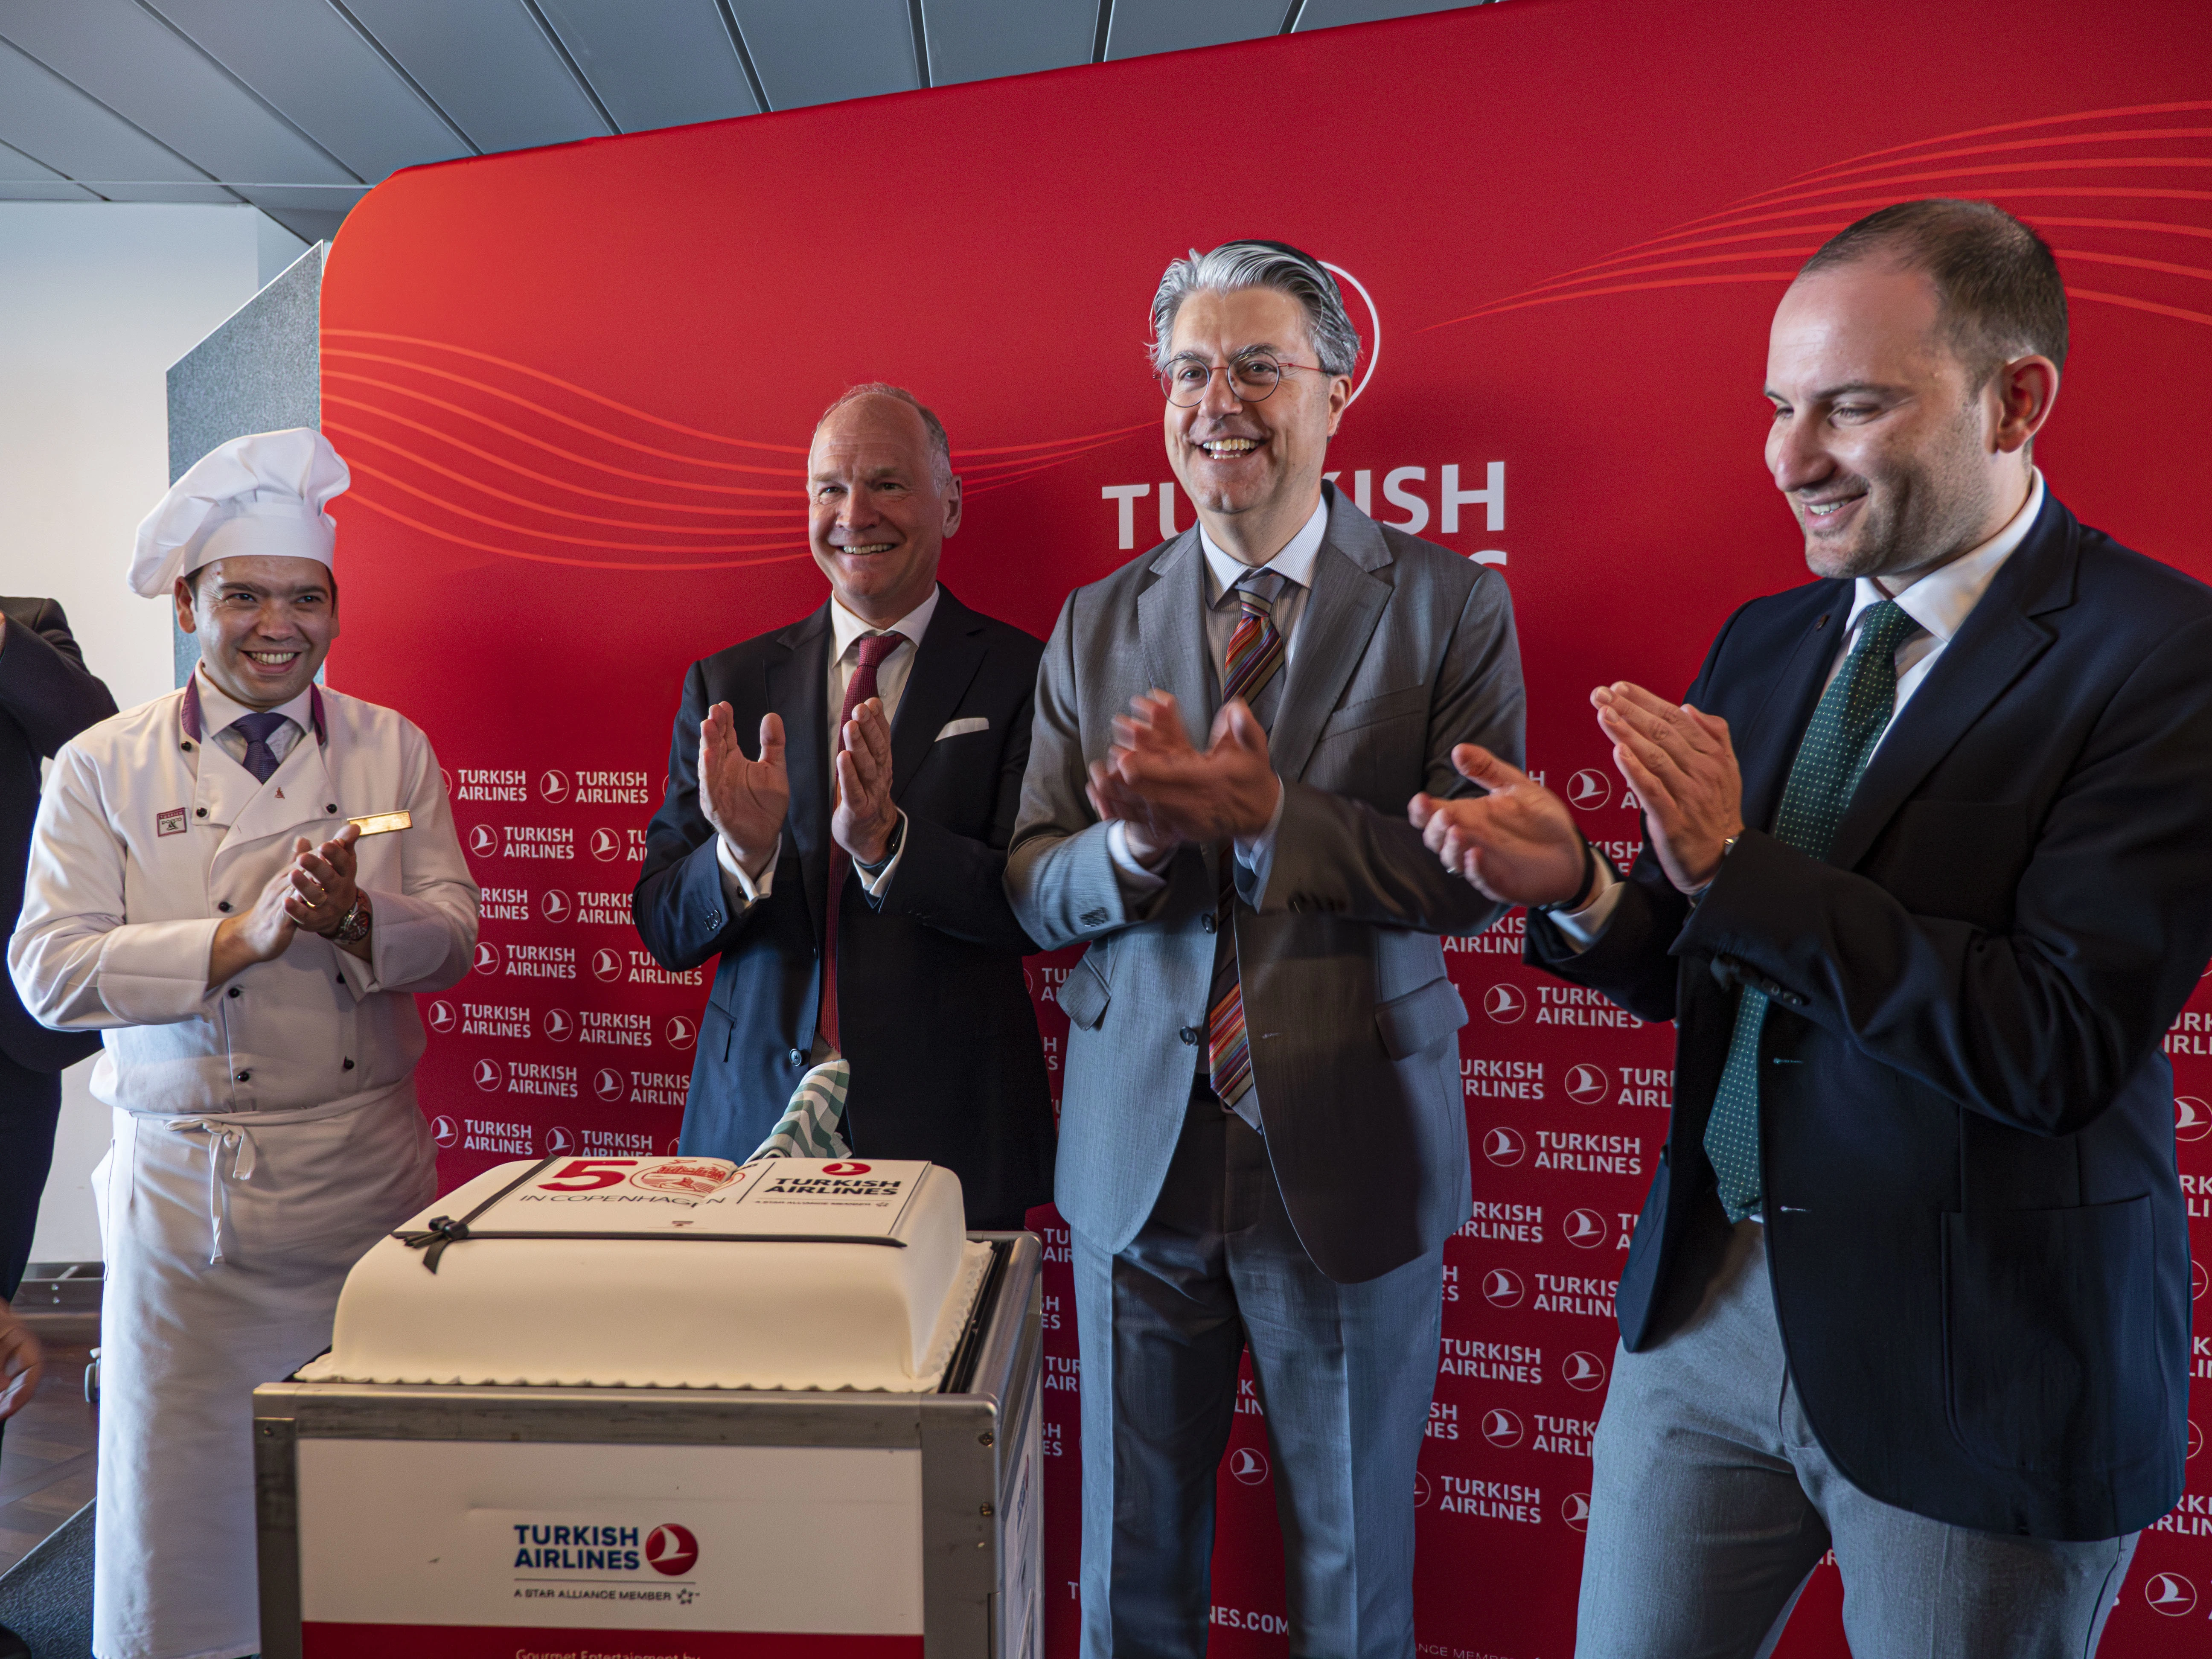 Turkish Airlines Celebrates its 50th anniversary of service to CPH